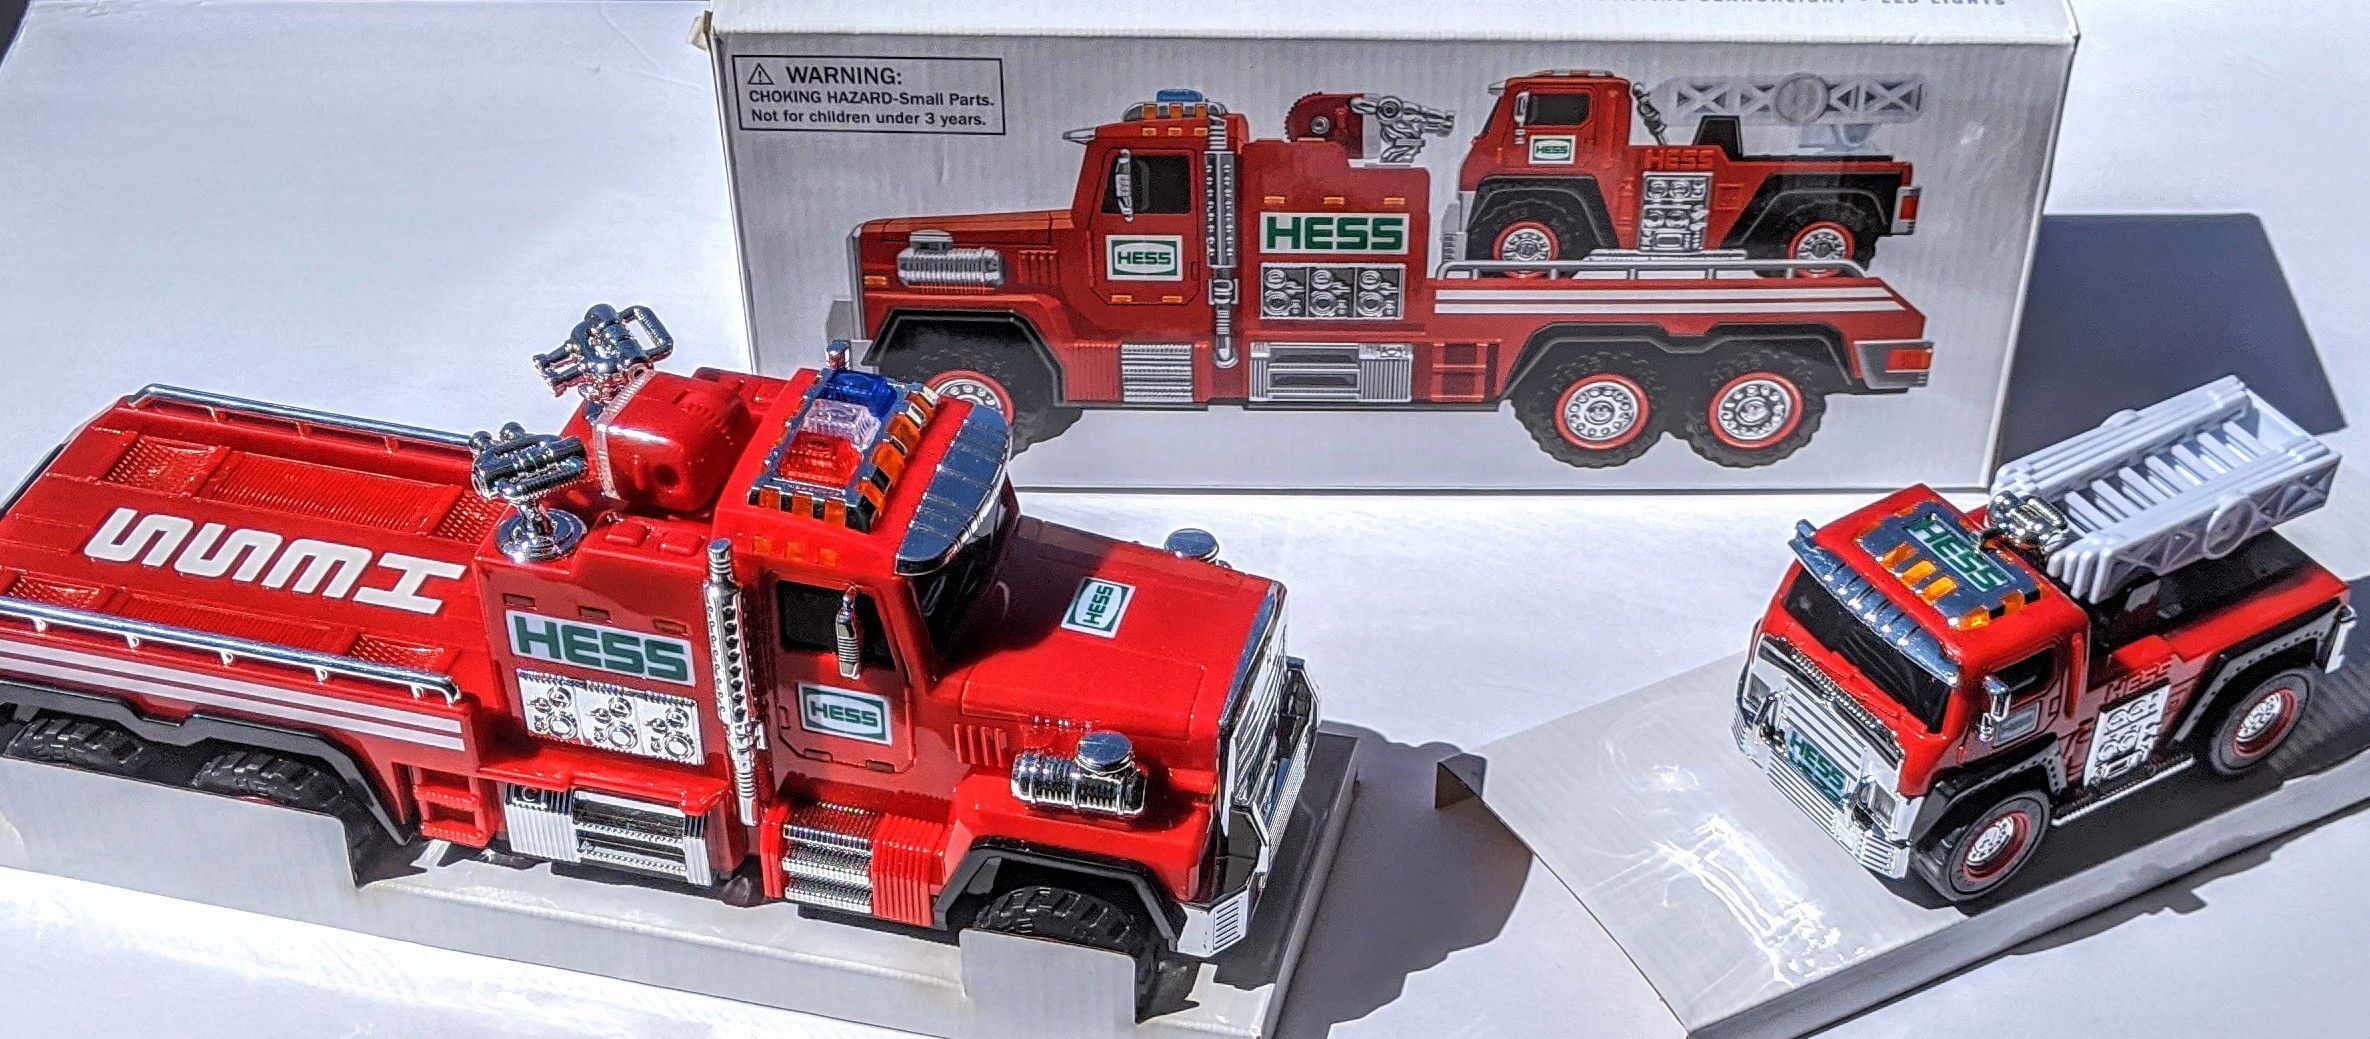 2015 Hess Collectible Toy Fire Truck and Ladder Rescue